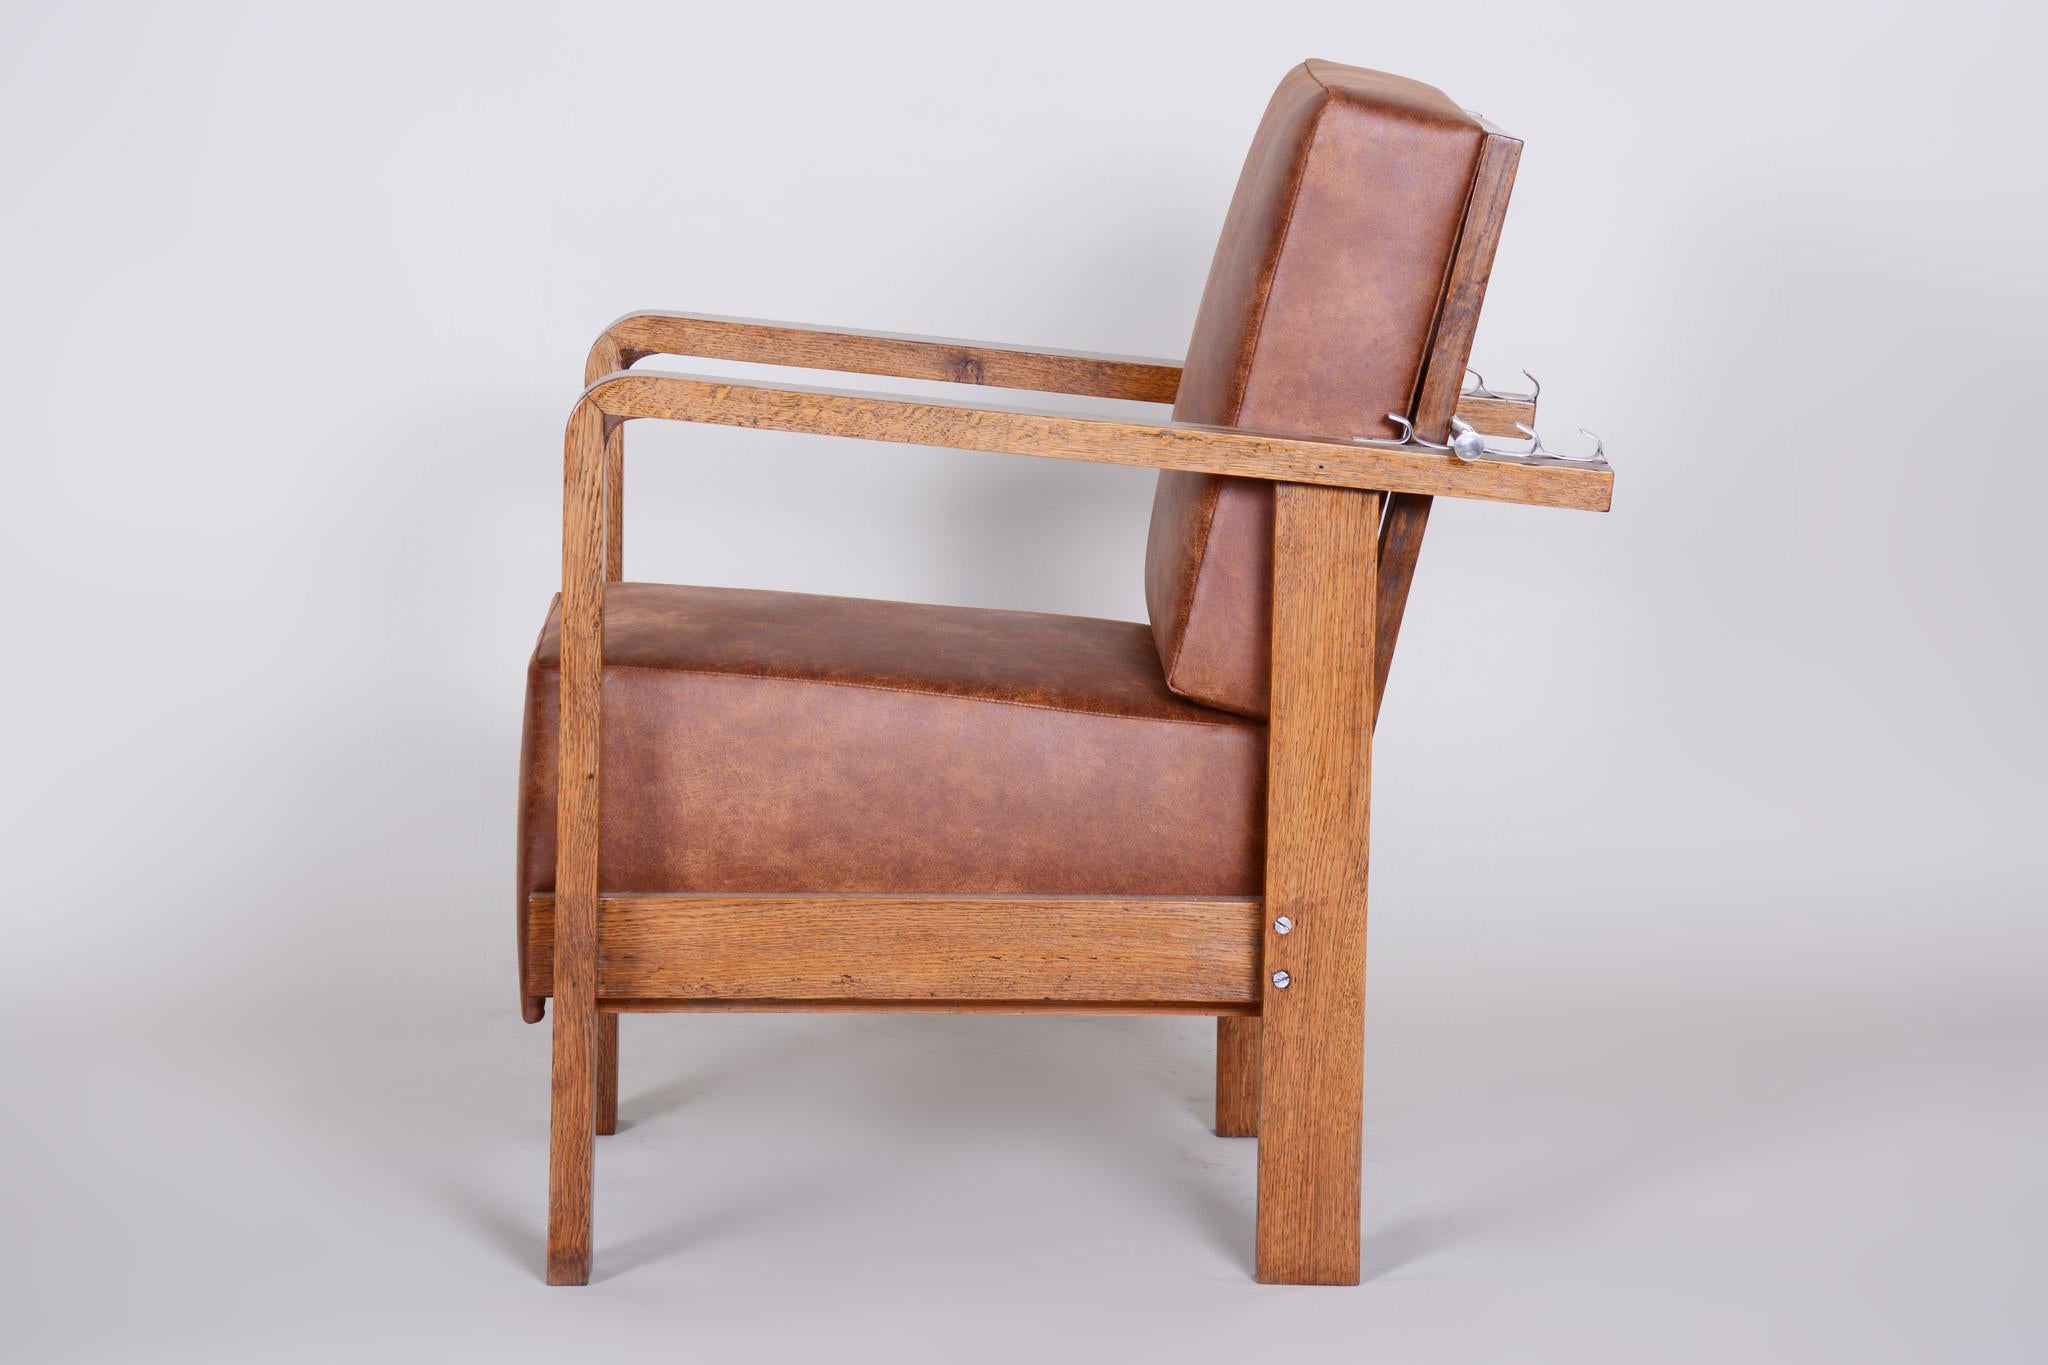 Pair of Czech Adjustable Functionalist Leather and Oak Armchairs, 1930s For Sale 3